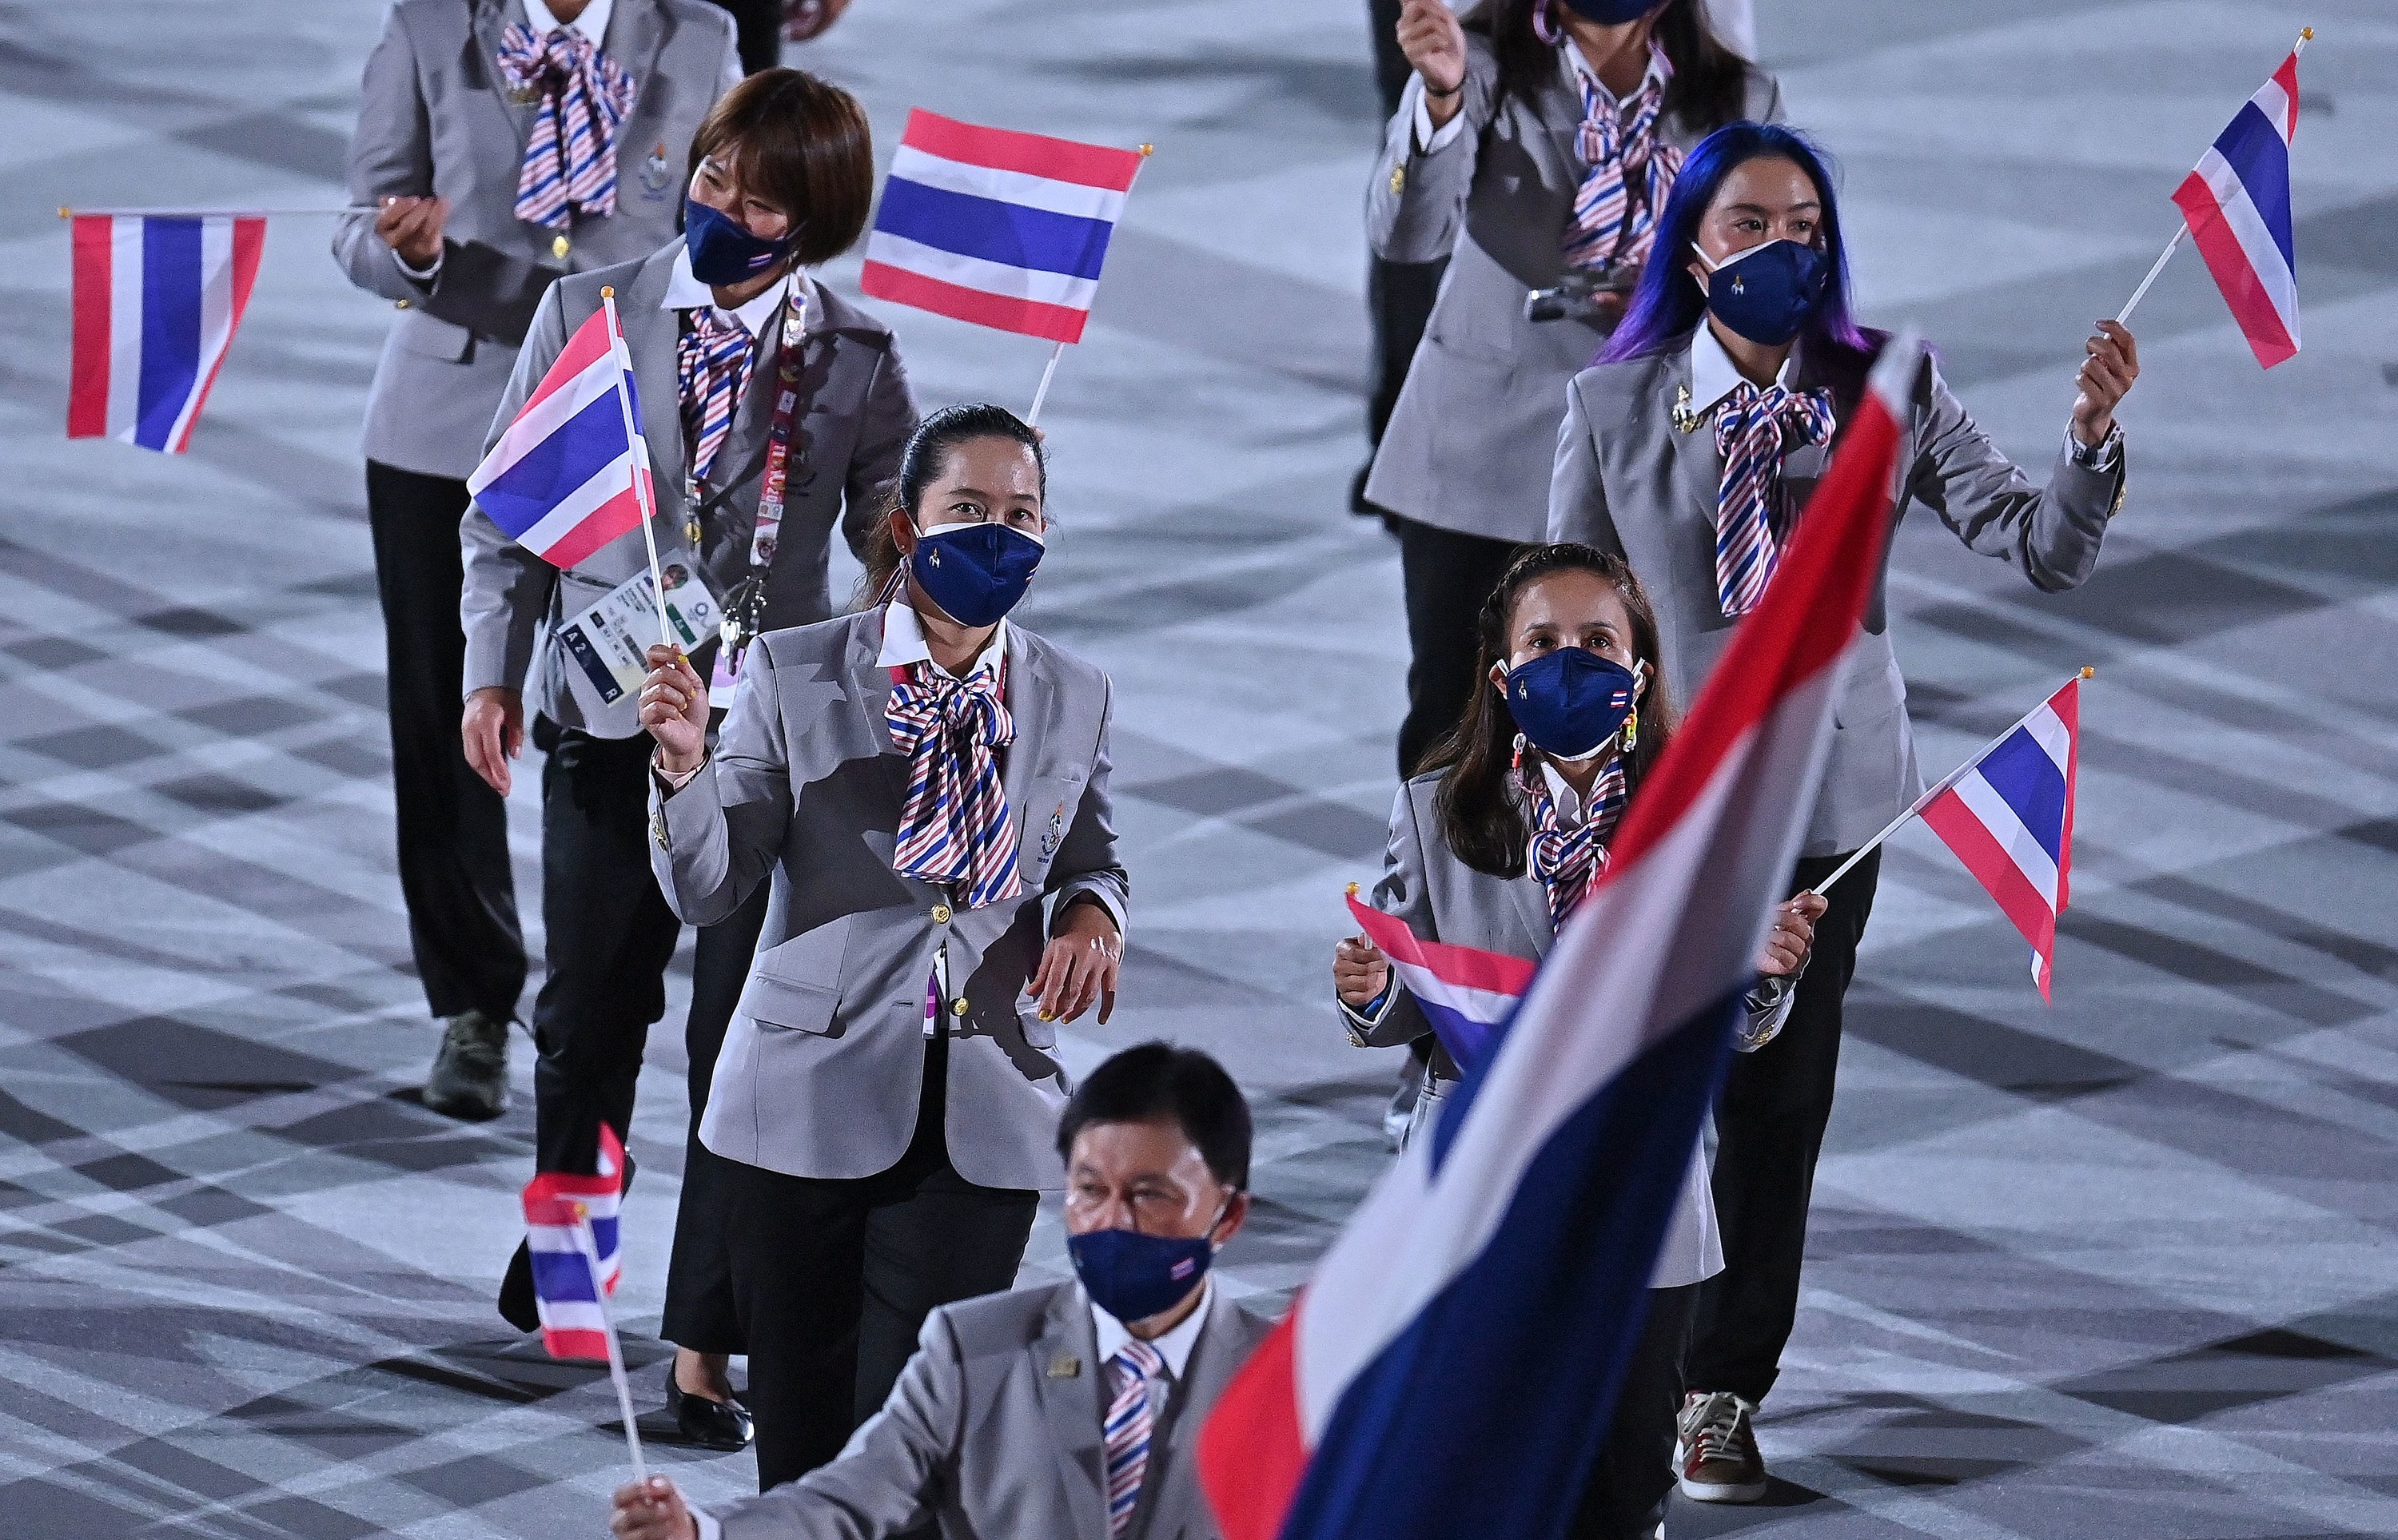 The athletes wore suits and matching ties neck scarves